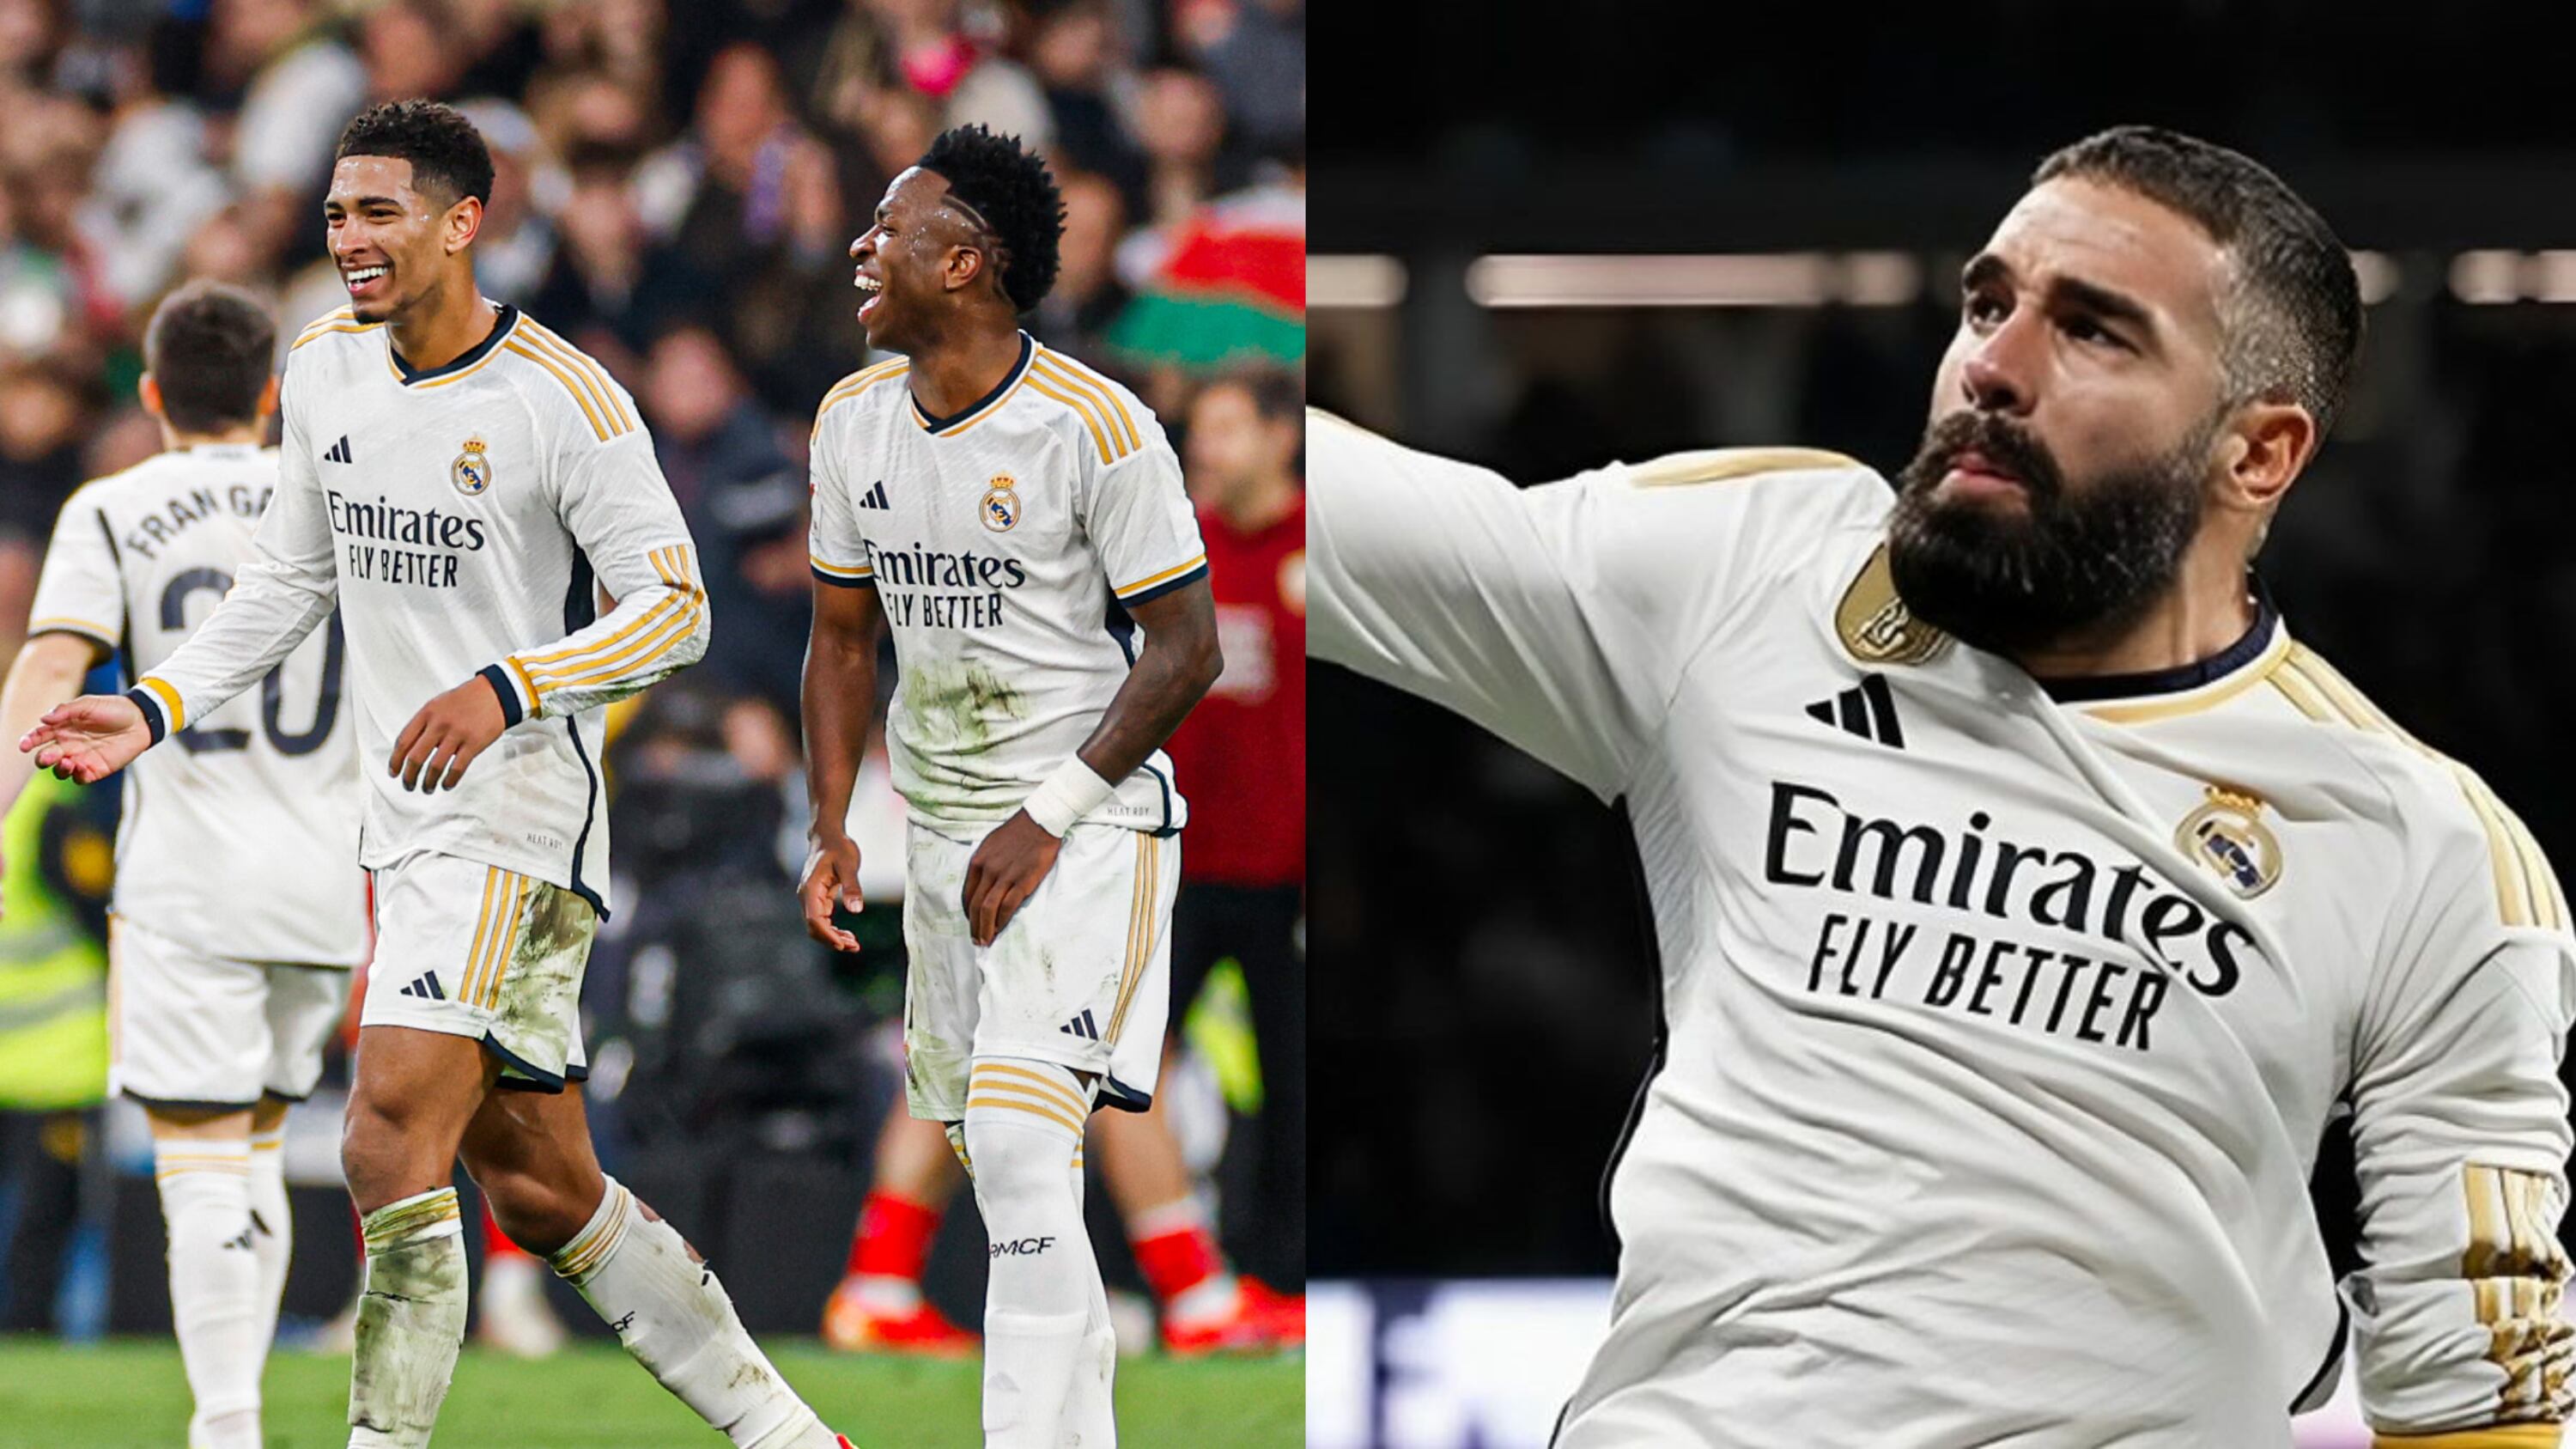 Did Real Madrid win by stealing? Dani Carvajal responded to the criticism